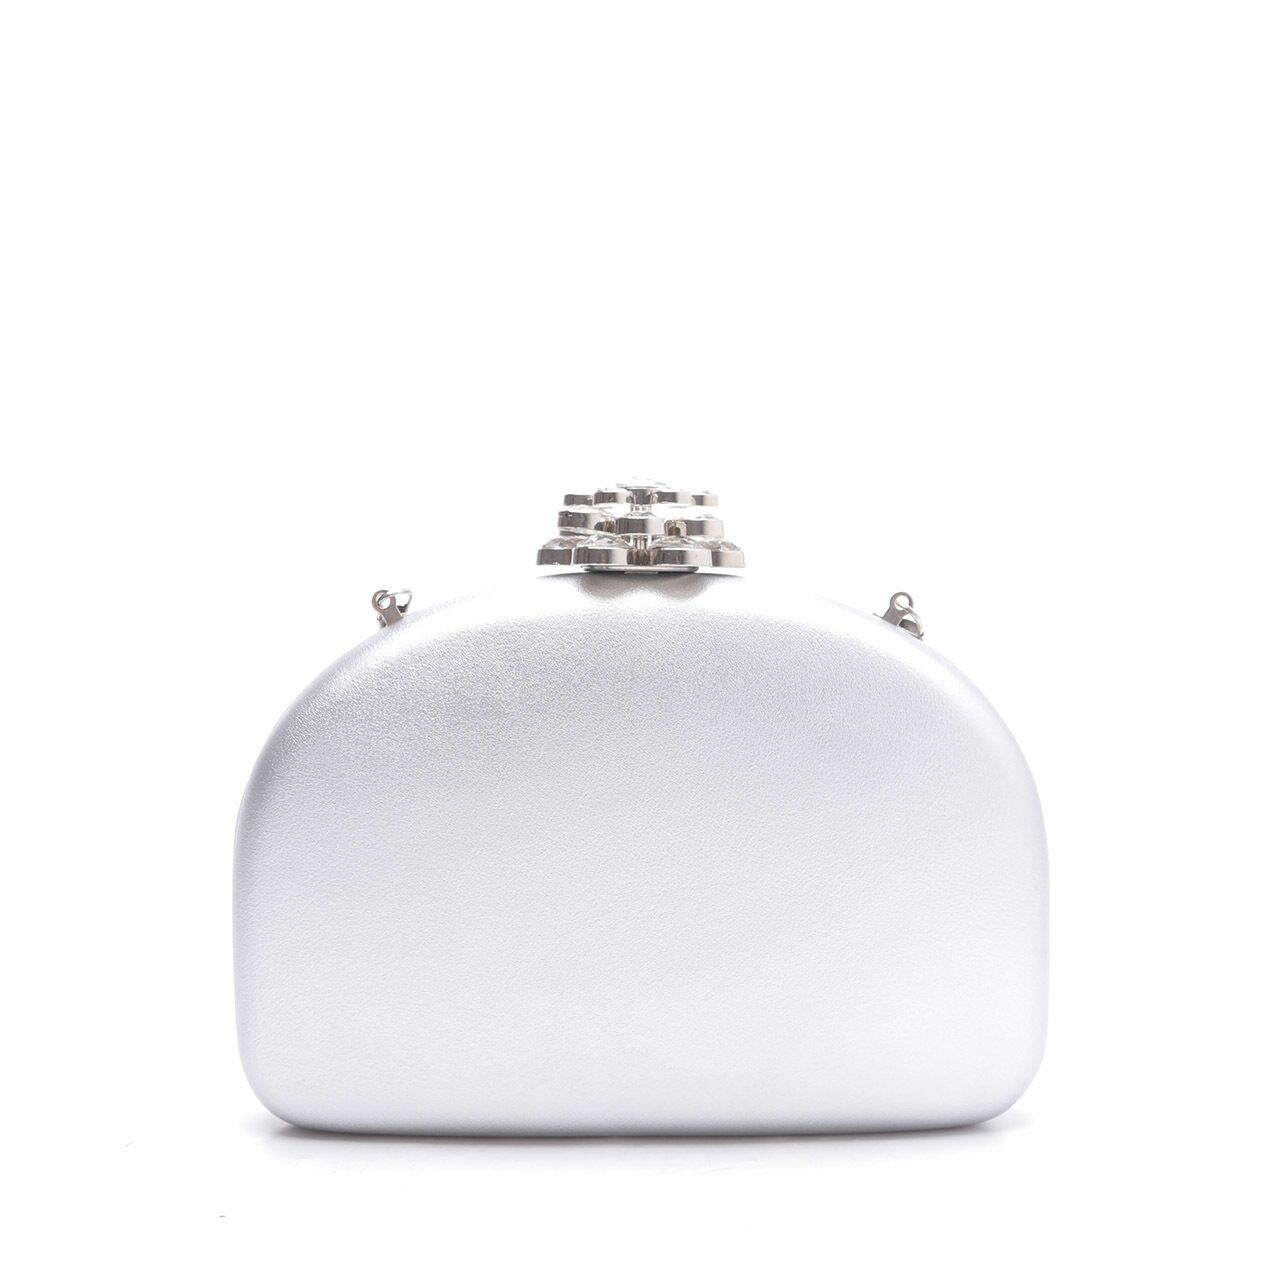 Glamorous Silver Leather Clutch